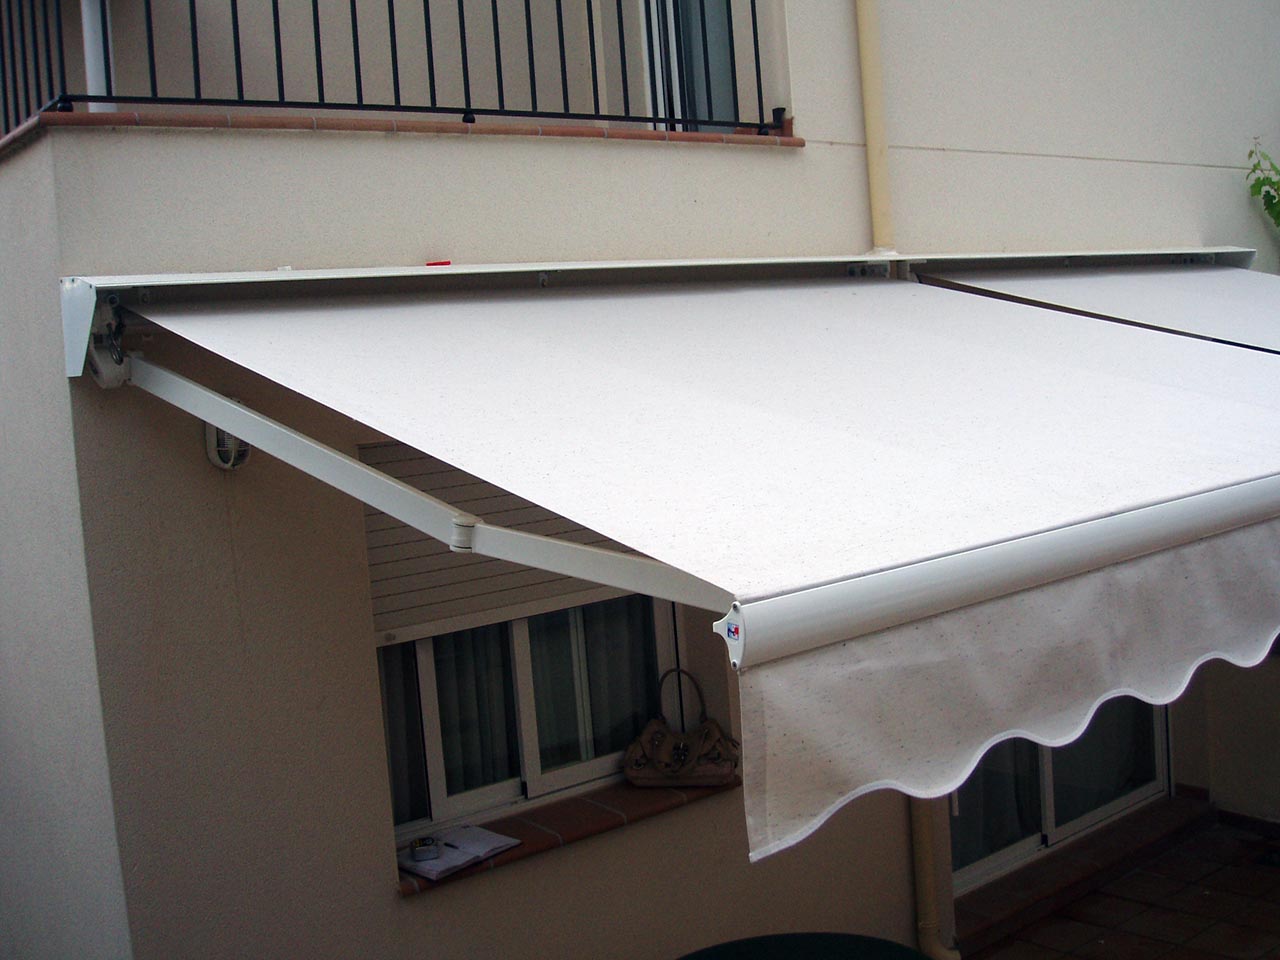 Protective cap for awning